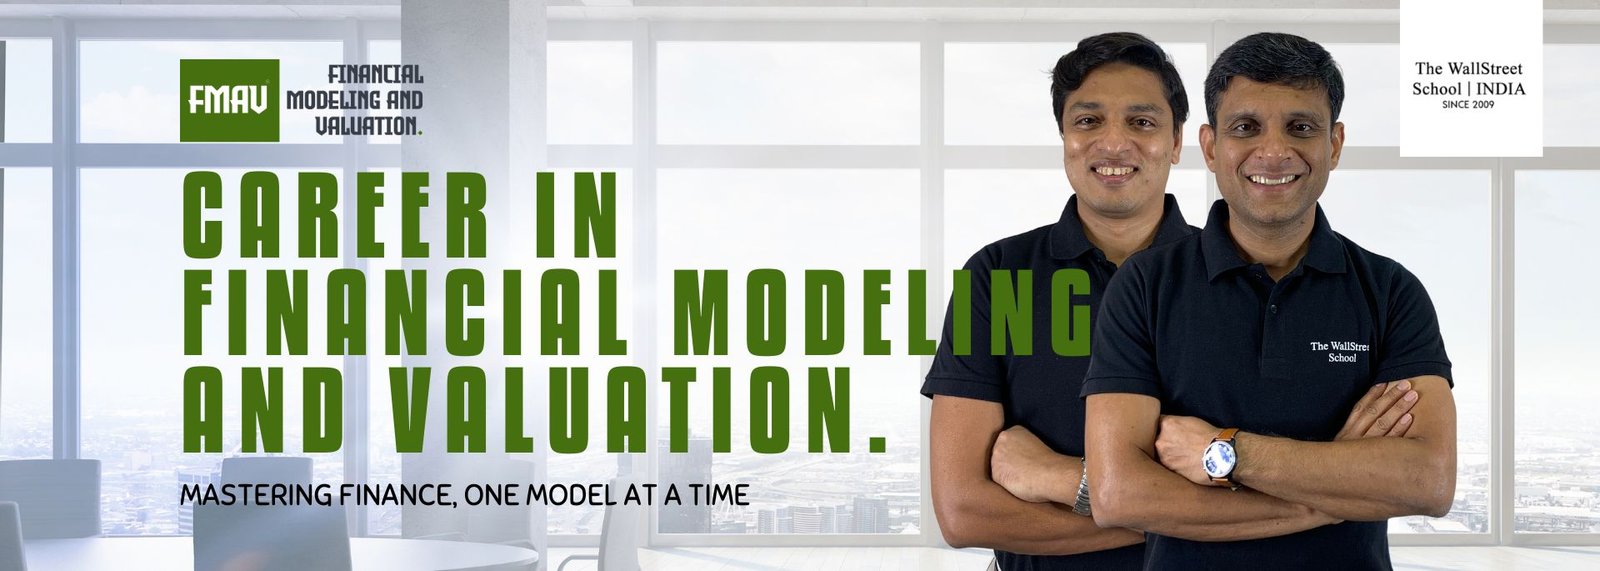 Career in Financial Modeling and Valuation TWSS